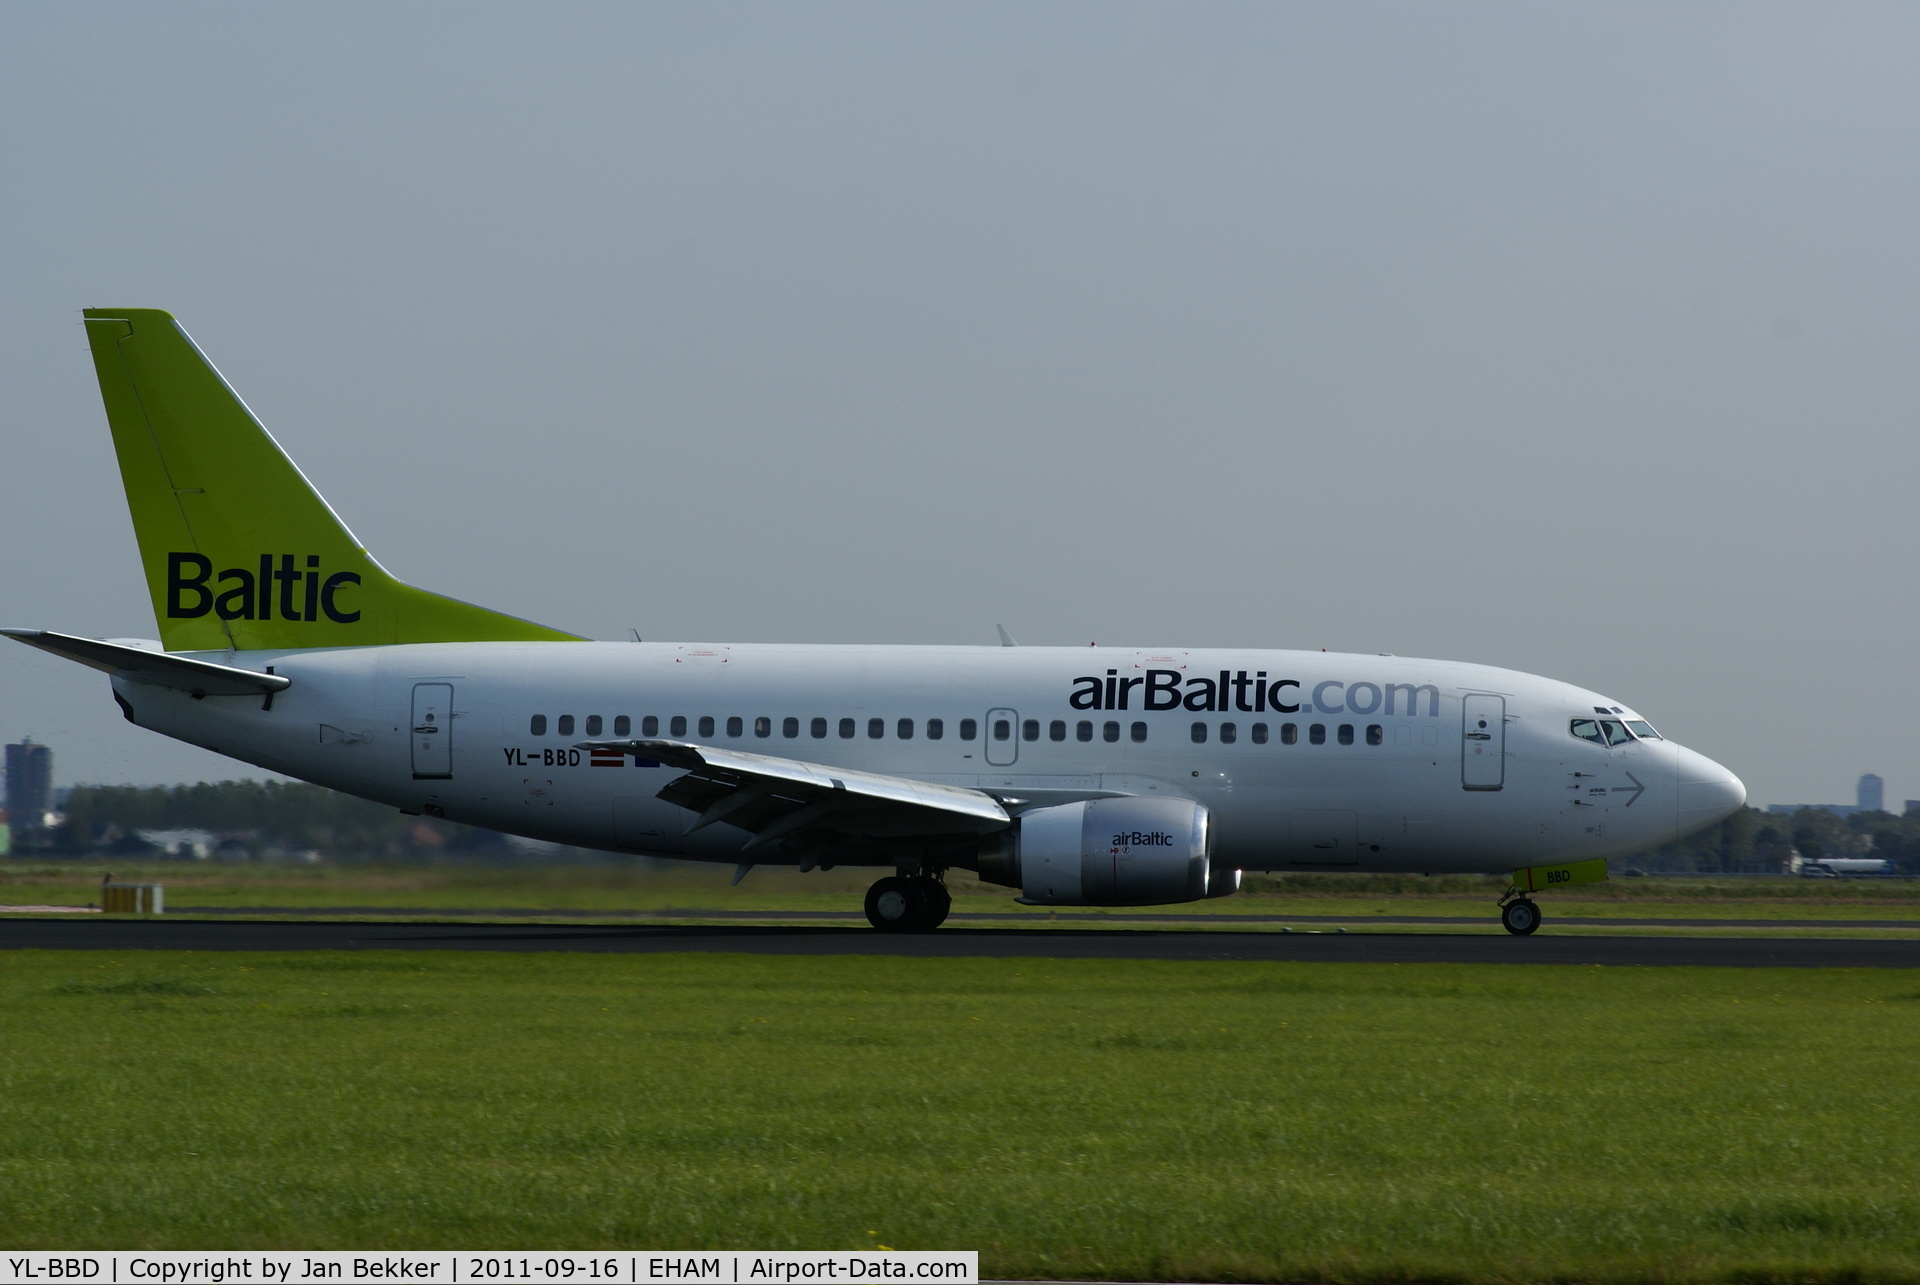 YL-BBD, 1999 Boeing 737-53S C/N 29075, Just after landing on the Polderbaan at Schiphol